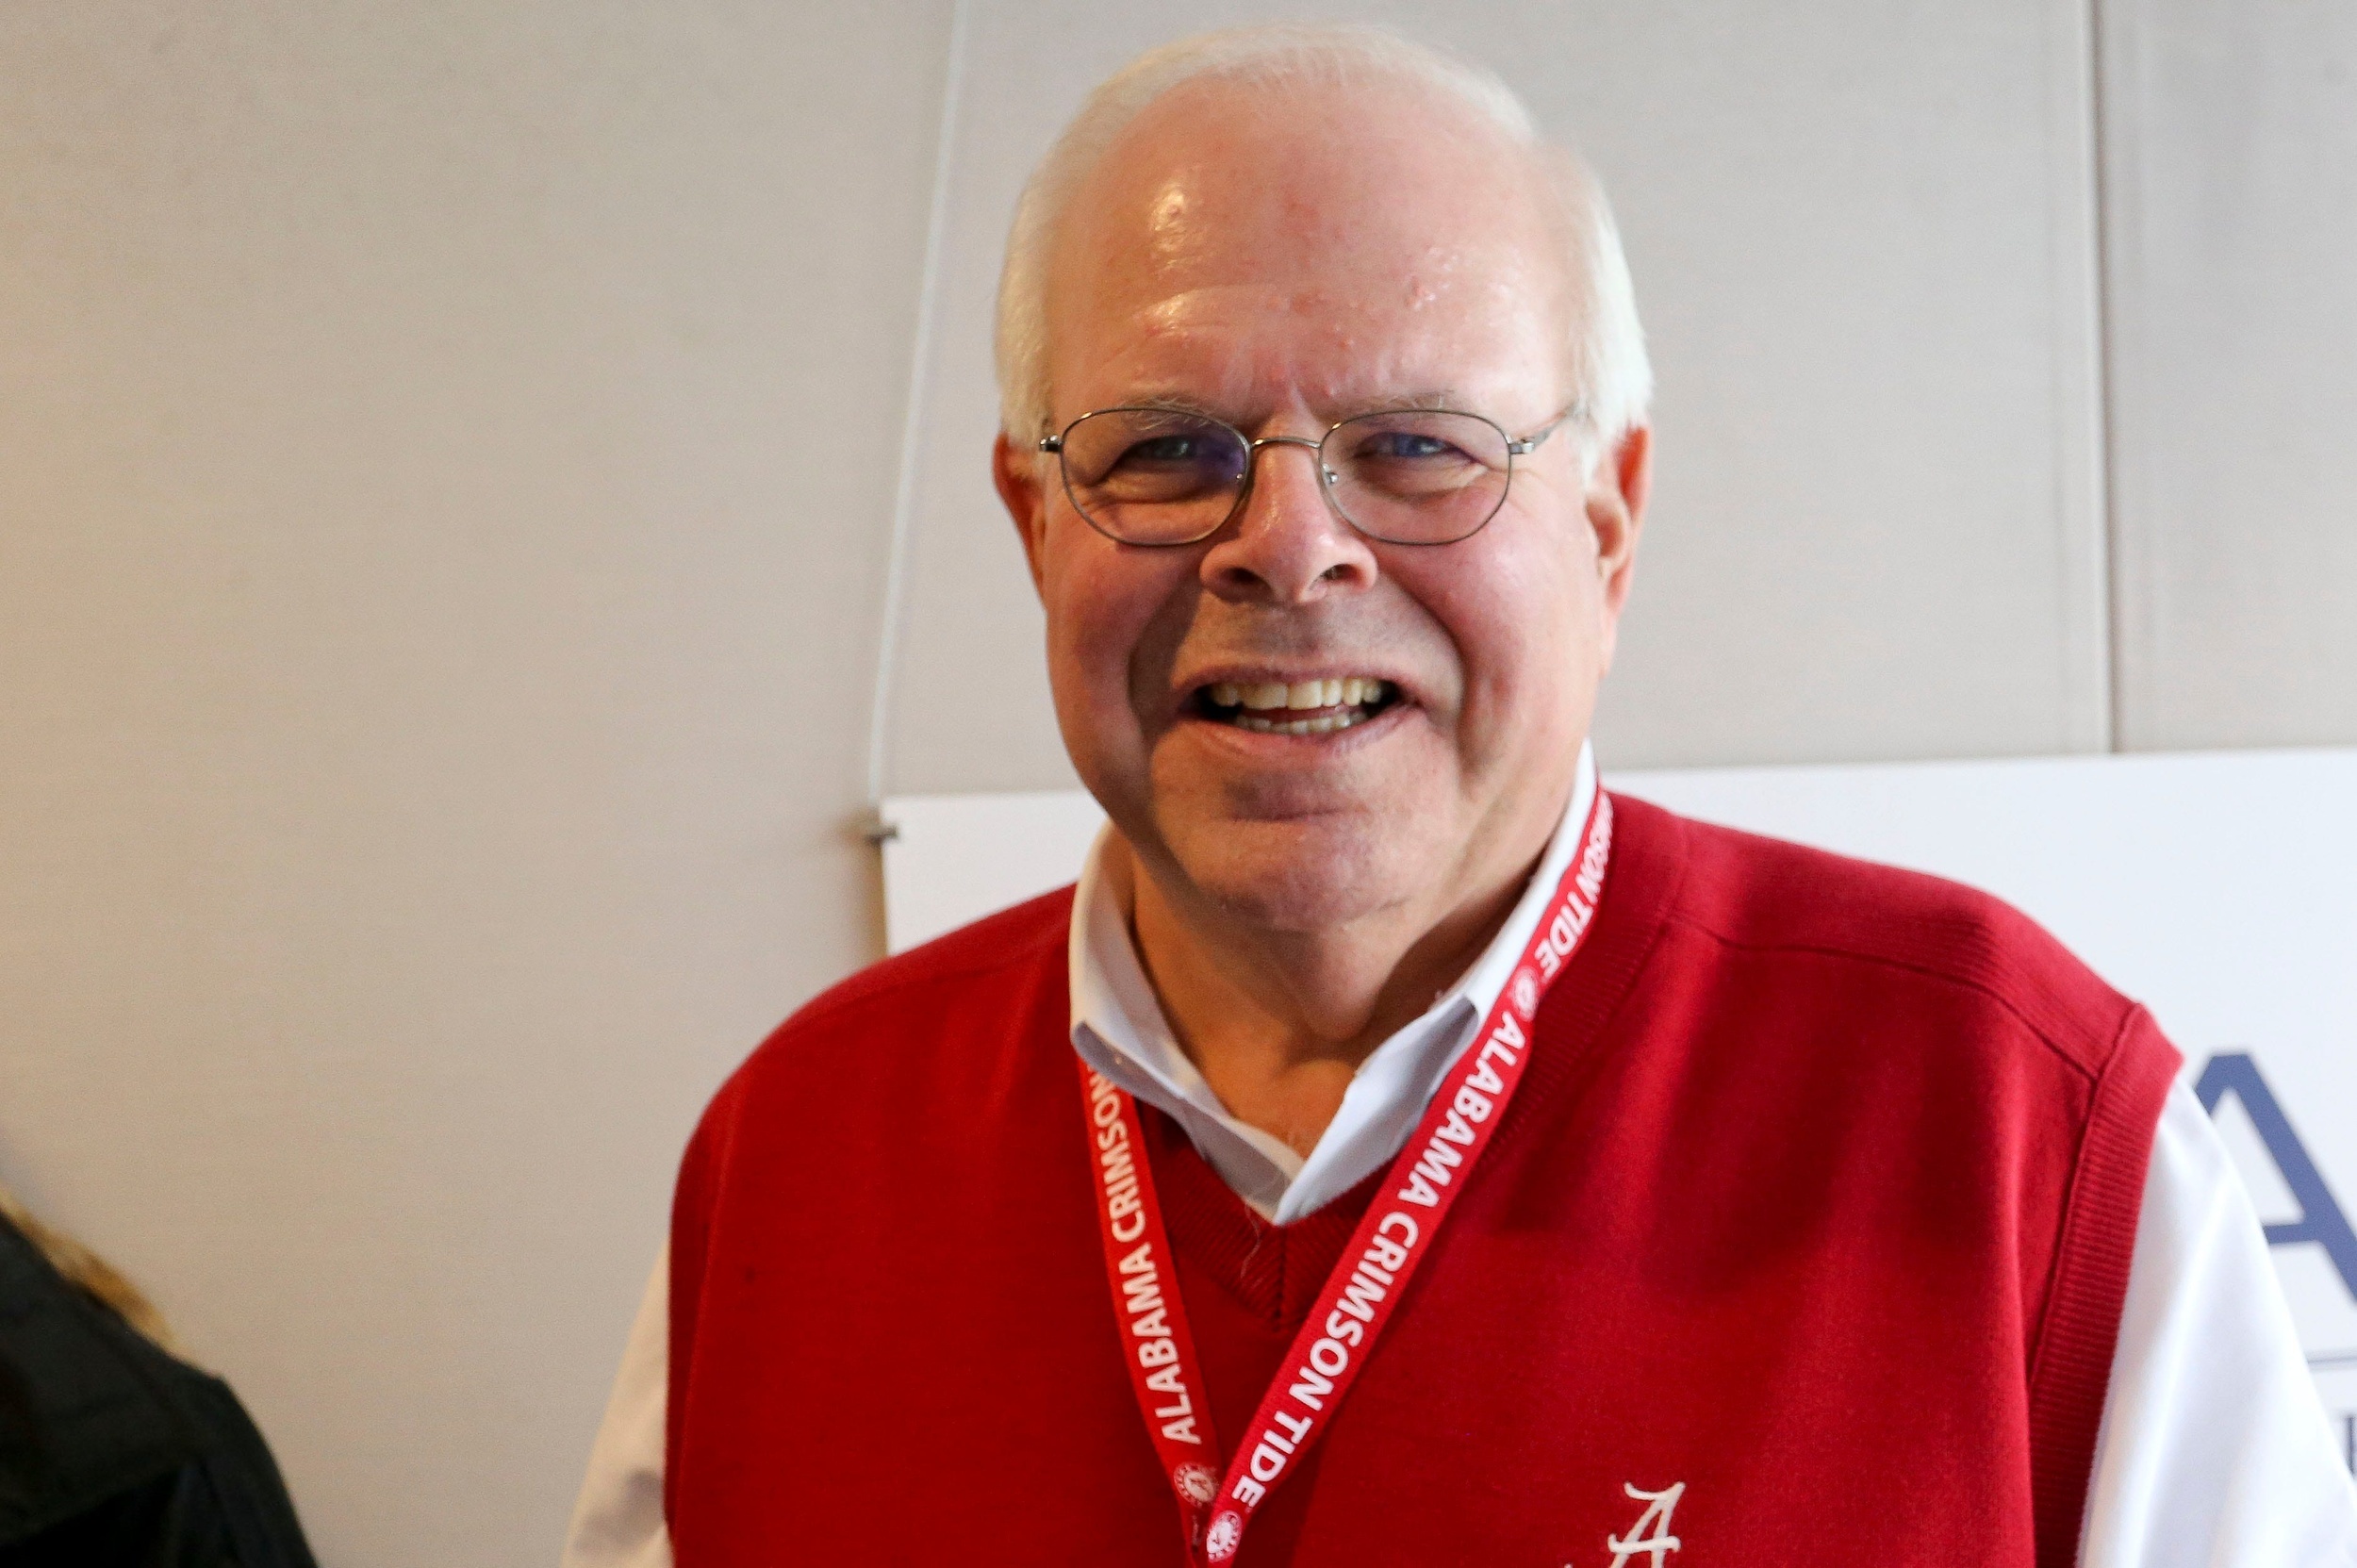 alabama parting ways with long-time broadcaster eli gold